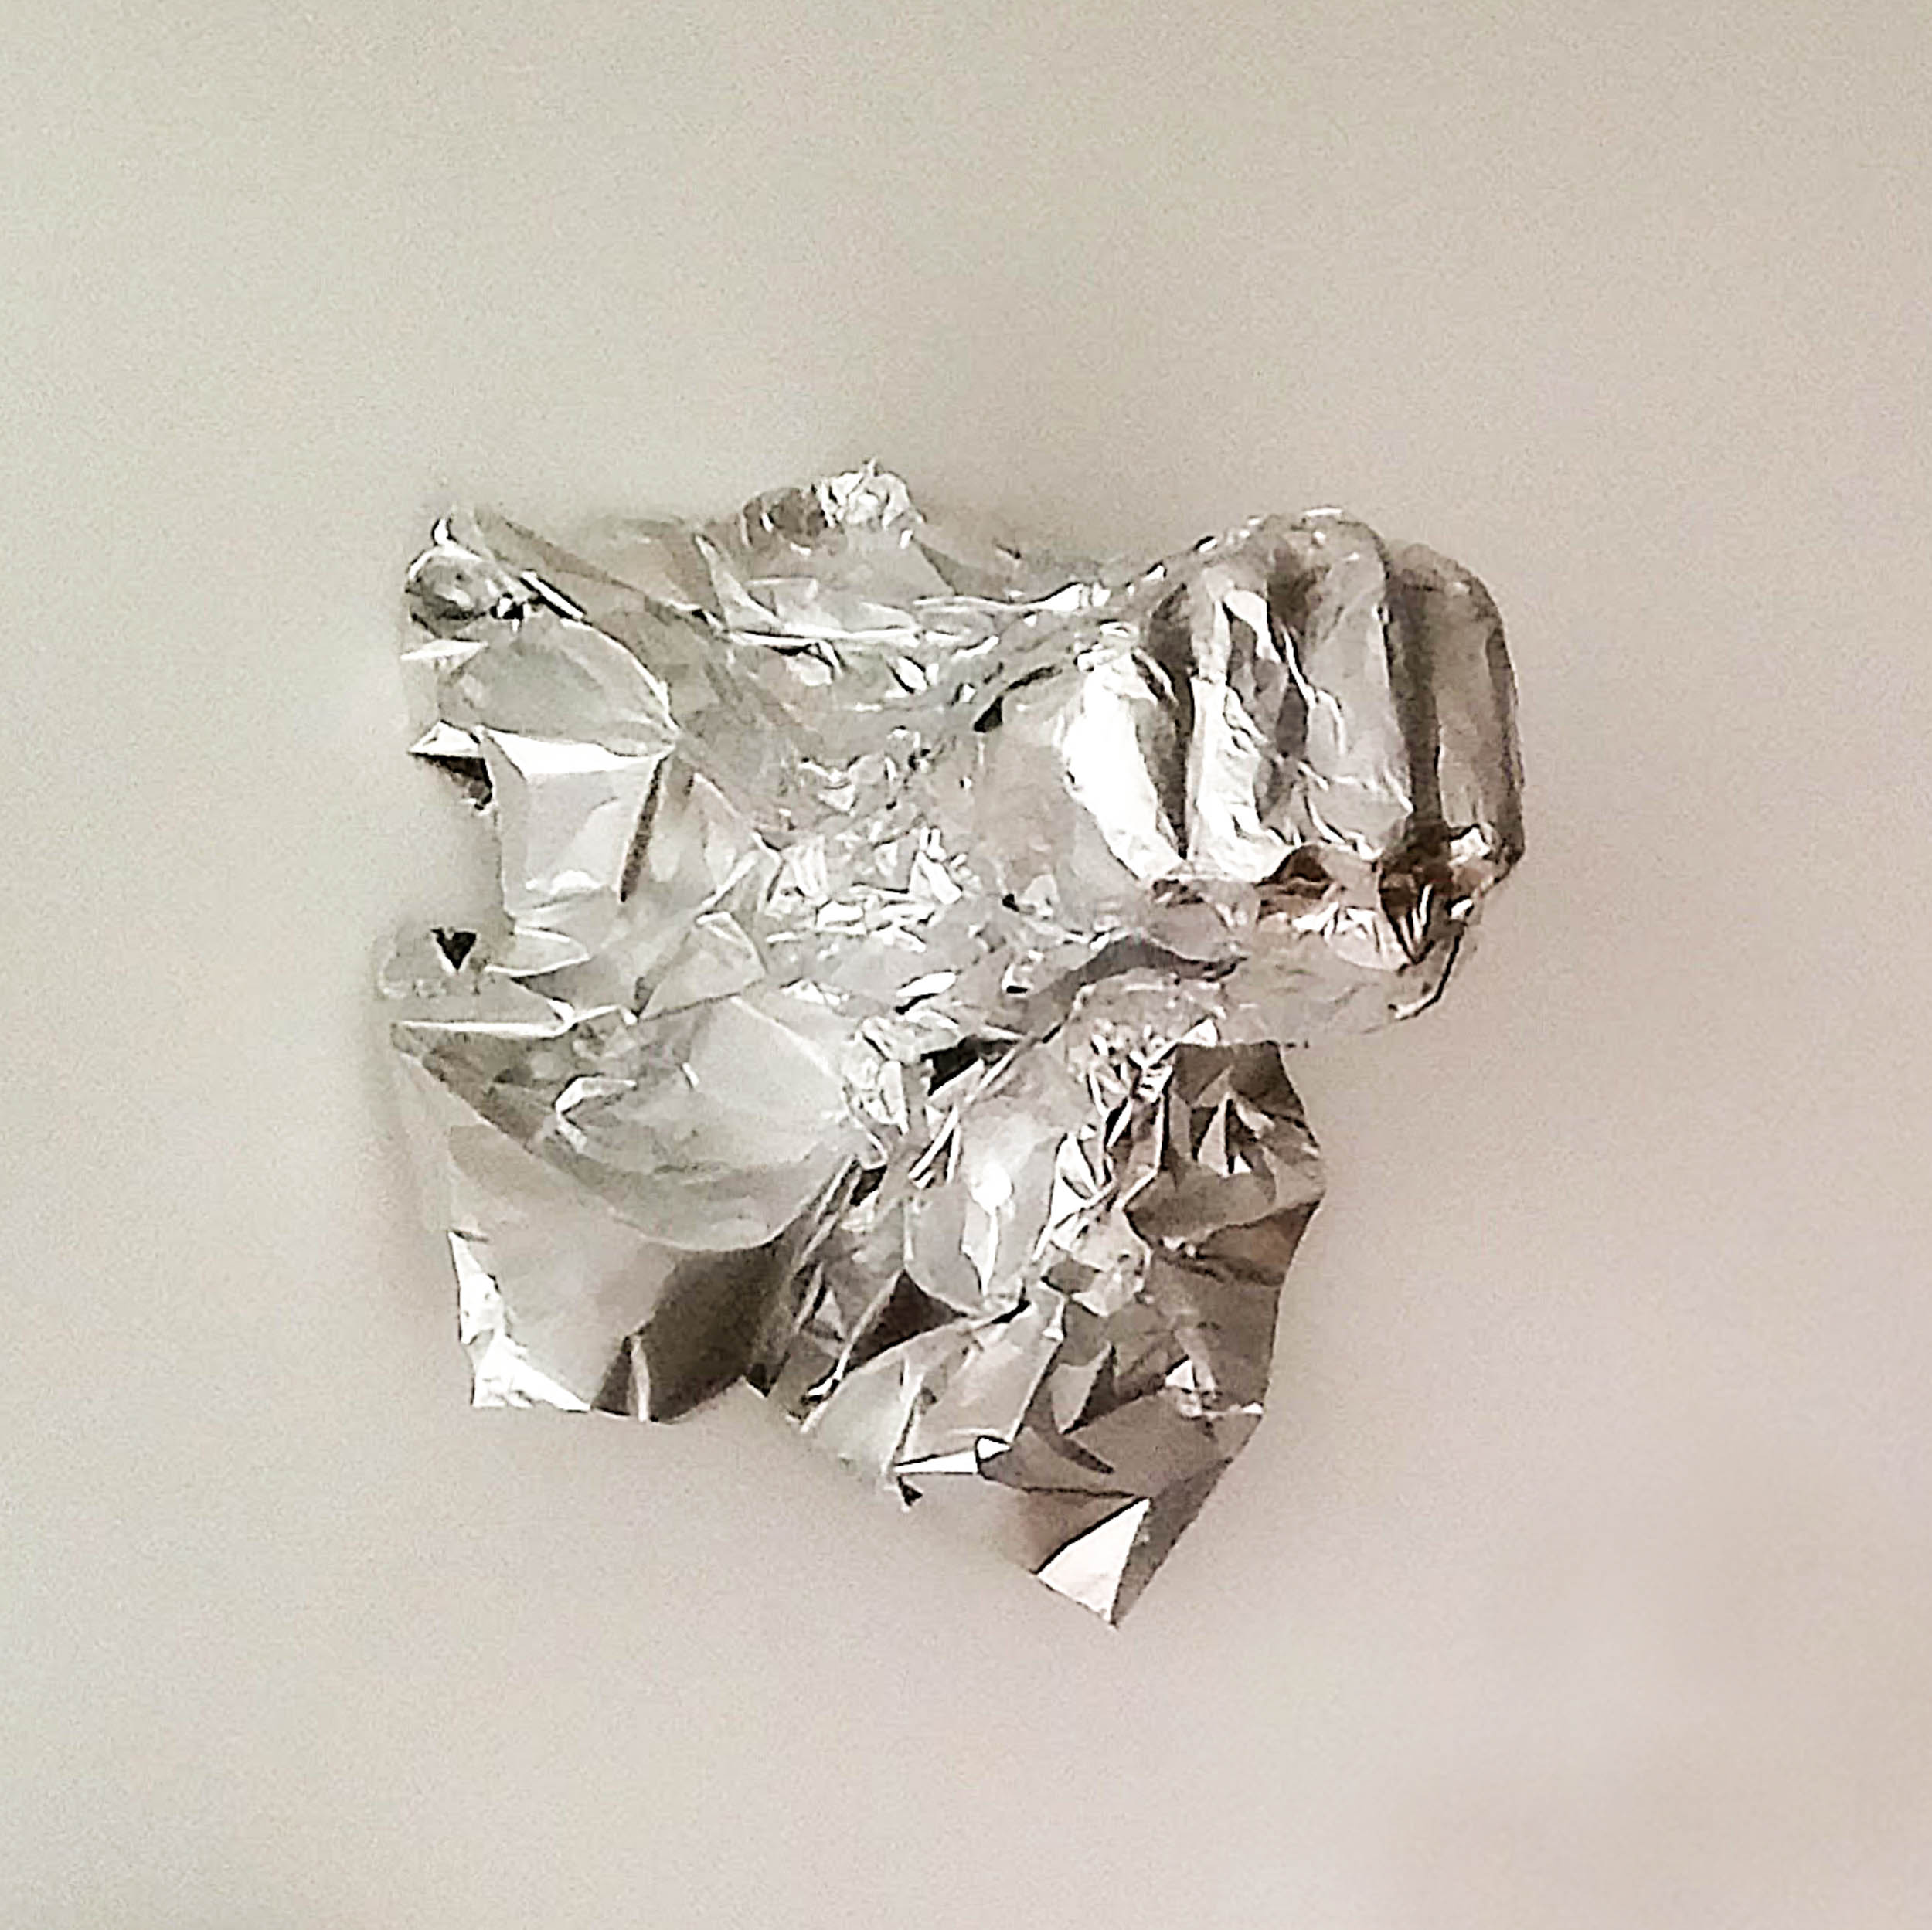  Aluminum foil molding of the artist’s fist are displayed in the exhibition space.  New aluminium foil sheets are available to the public during performances. The visitors can then mold their own fist and add it to the «Wall of Resistance», creating 